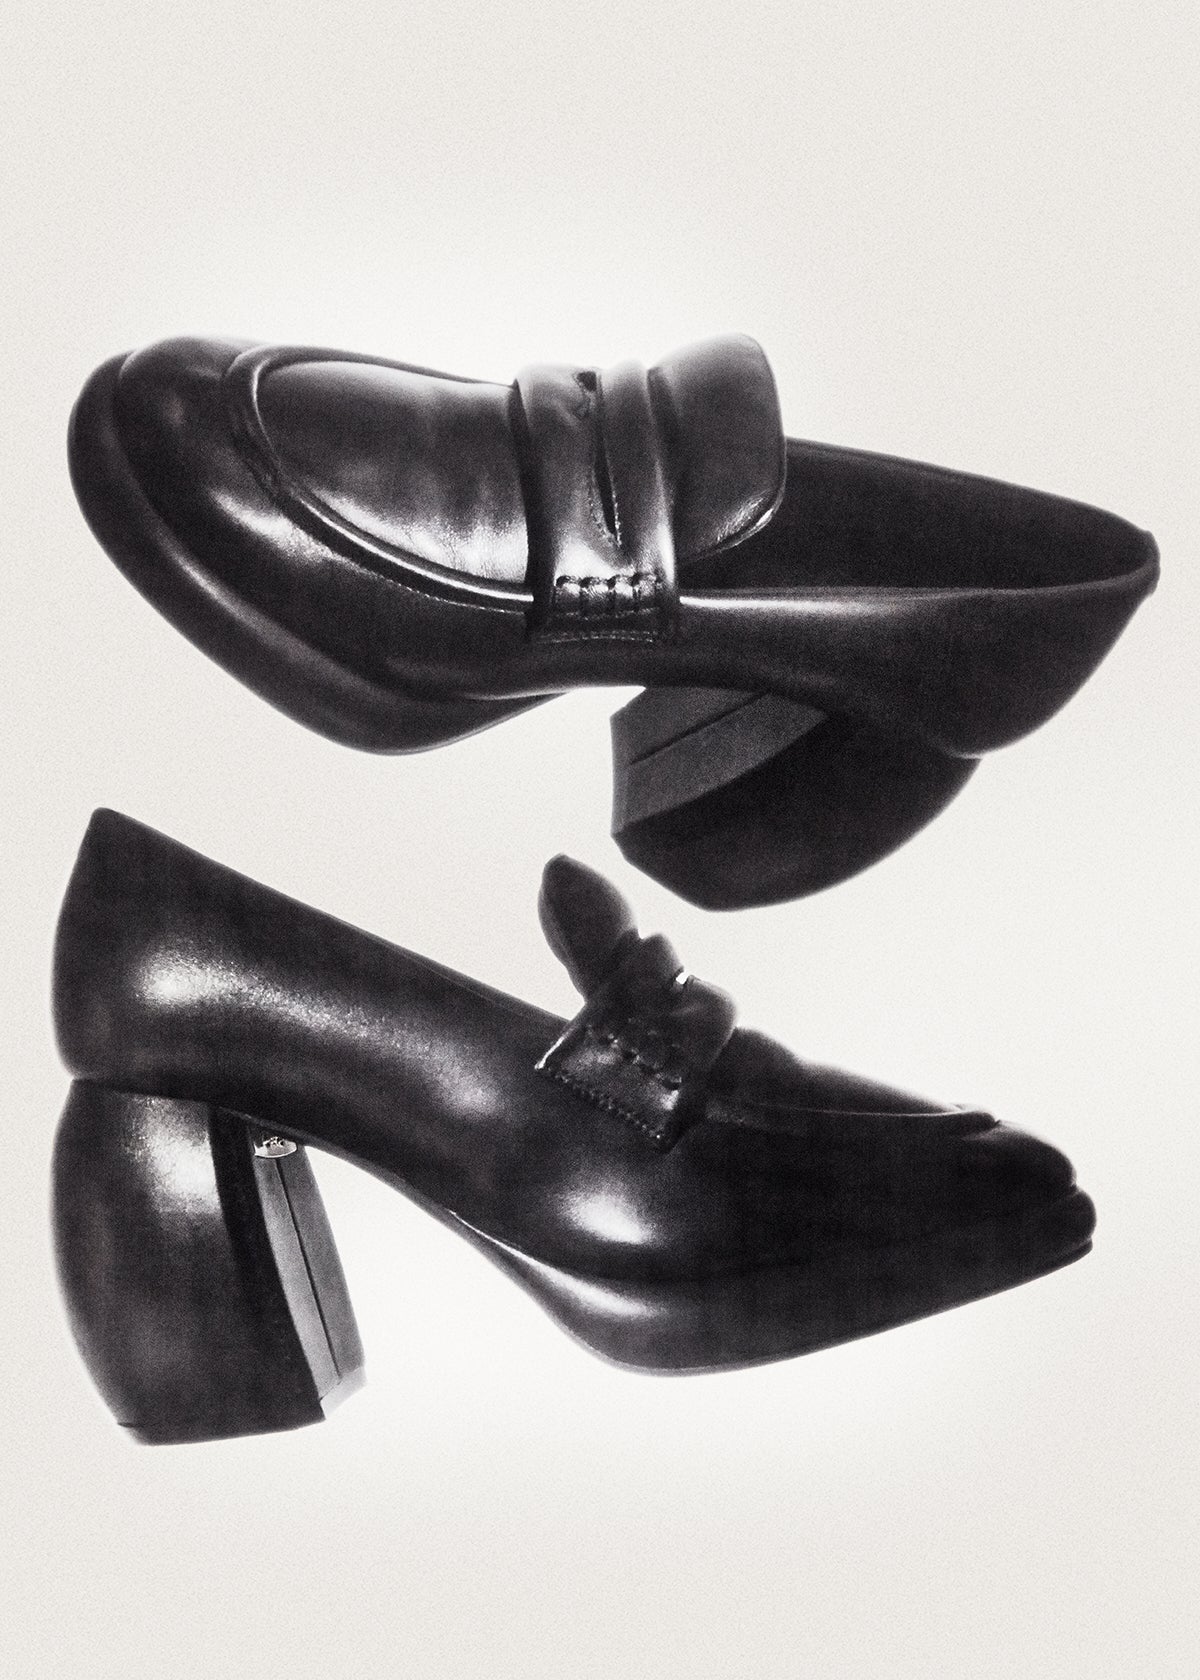 Designer Shoes: loafers and mules | Martine Rose